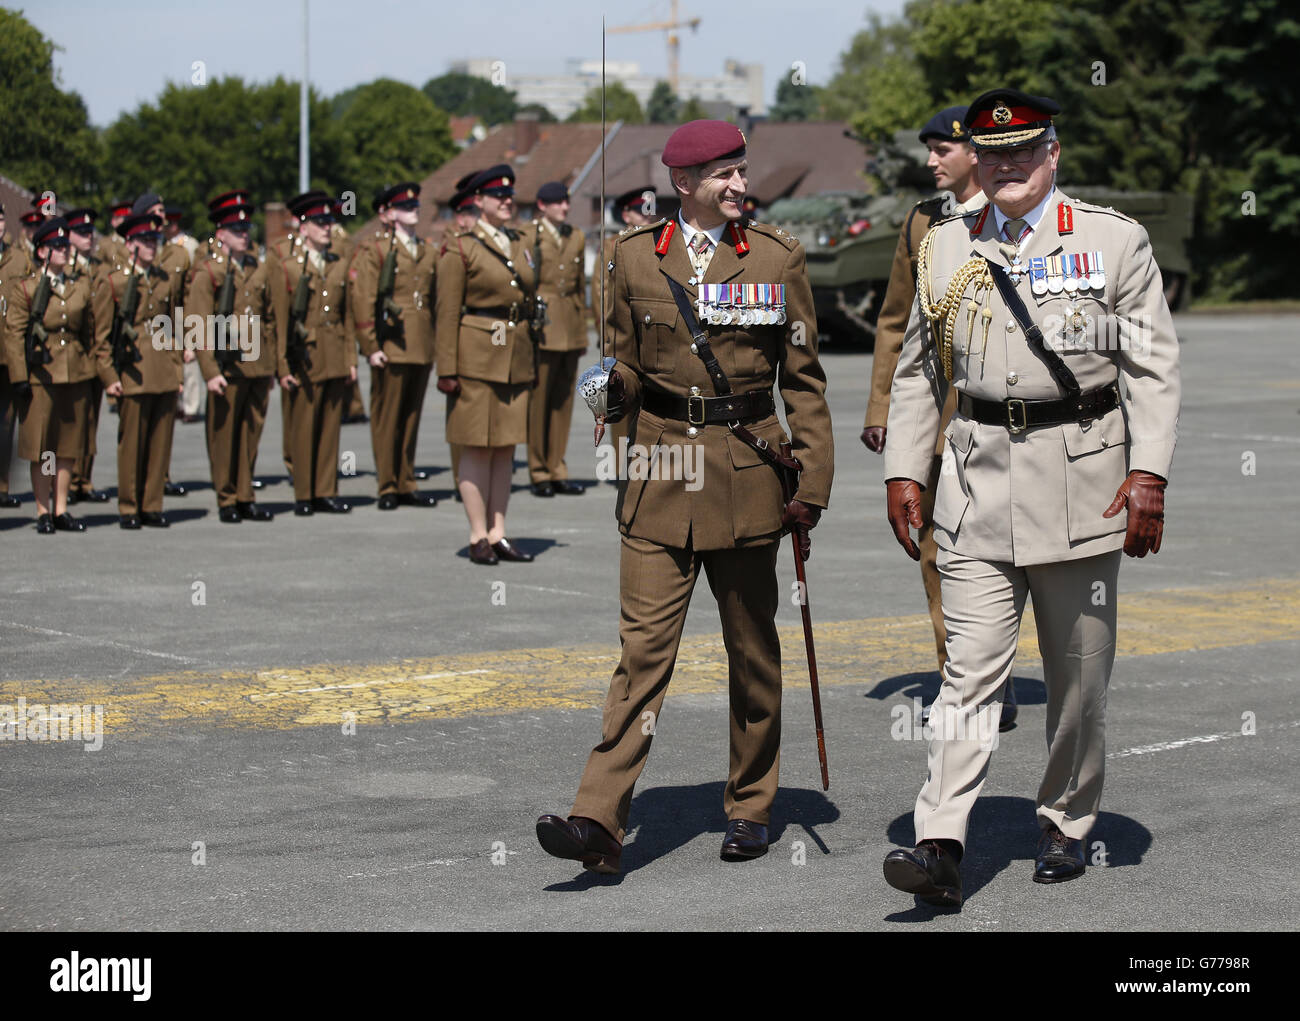 The Chief of the General Staff General Sir Peter Wall (right) accompanied by Major General James Chiswell during a renaming parade at Hammersmith Barracks, Herford, Germany. Stock Photo